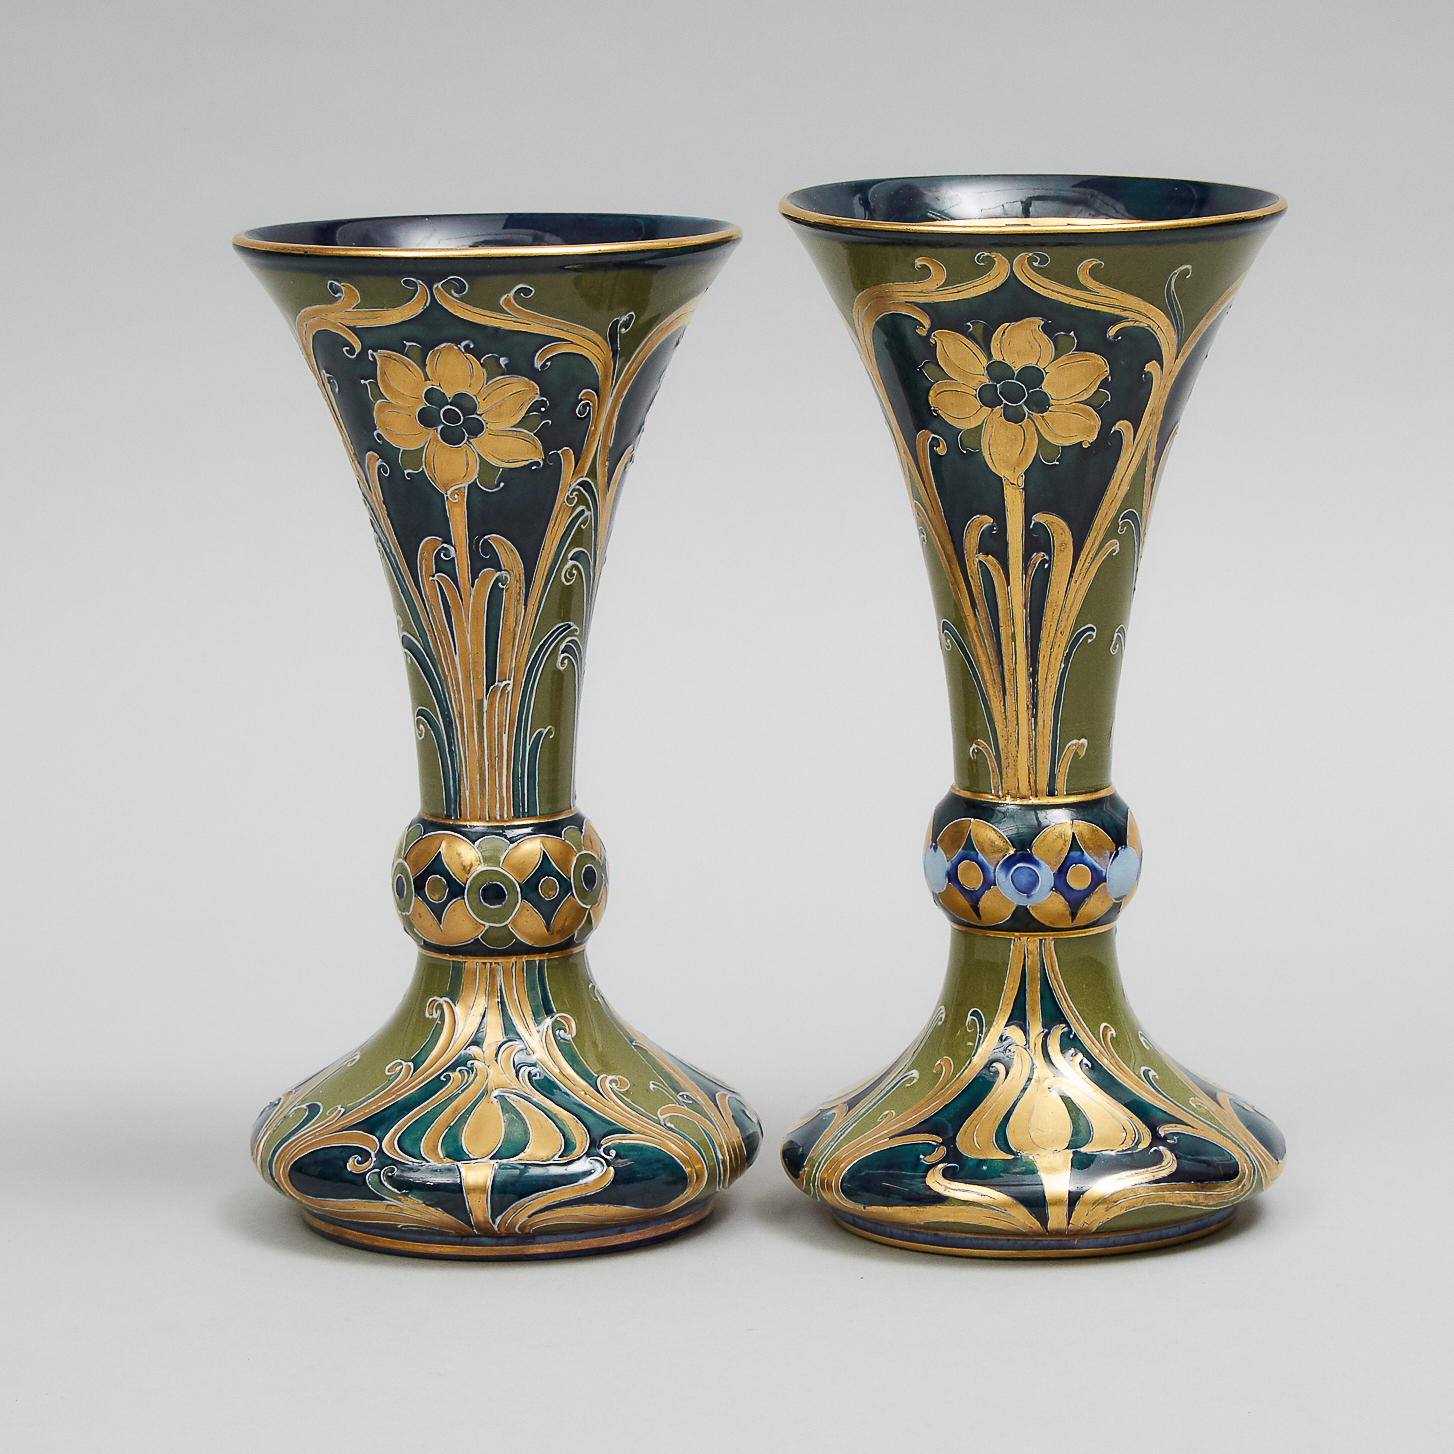 Two Closely Similar Macintyre Moorcroft Green and Gold Florian Trumpet Vases, c.1903